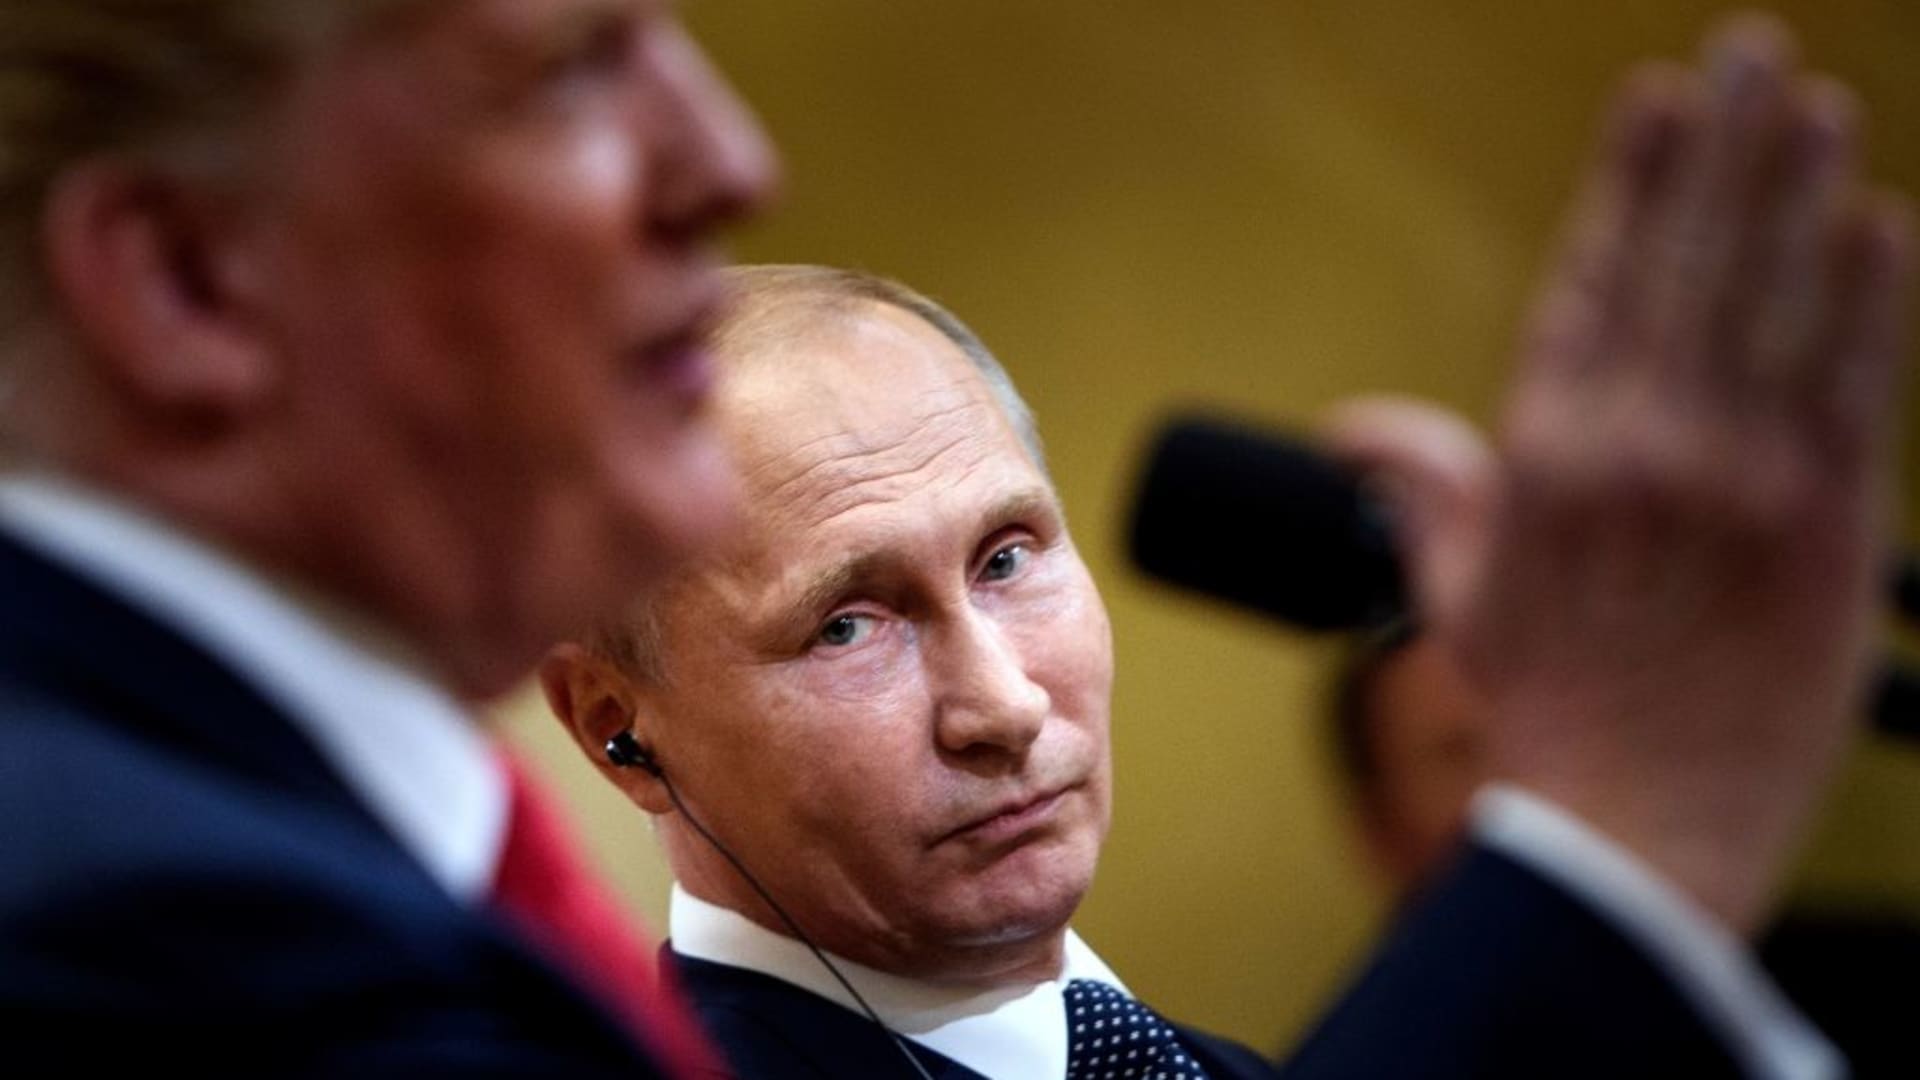 Russia's President Vladimir Putin listens while then-U.S. President Donald Trump speaks during a press conference in Helsinki, Finland, in 2019.